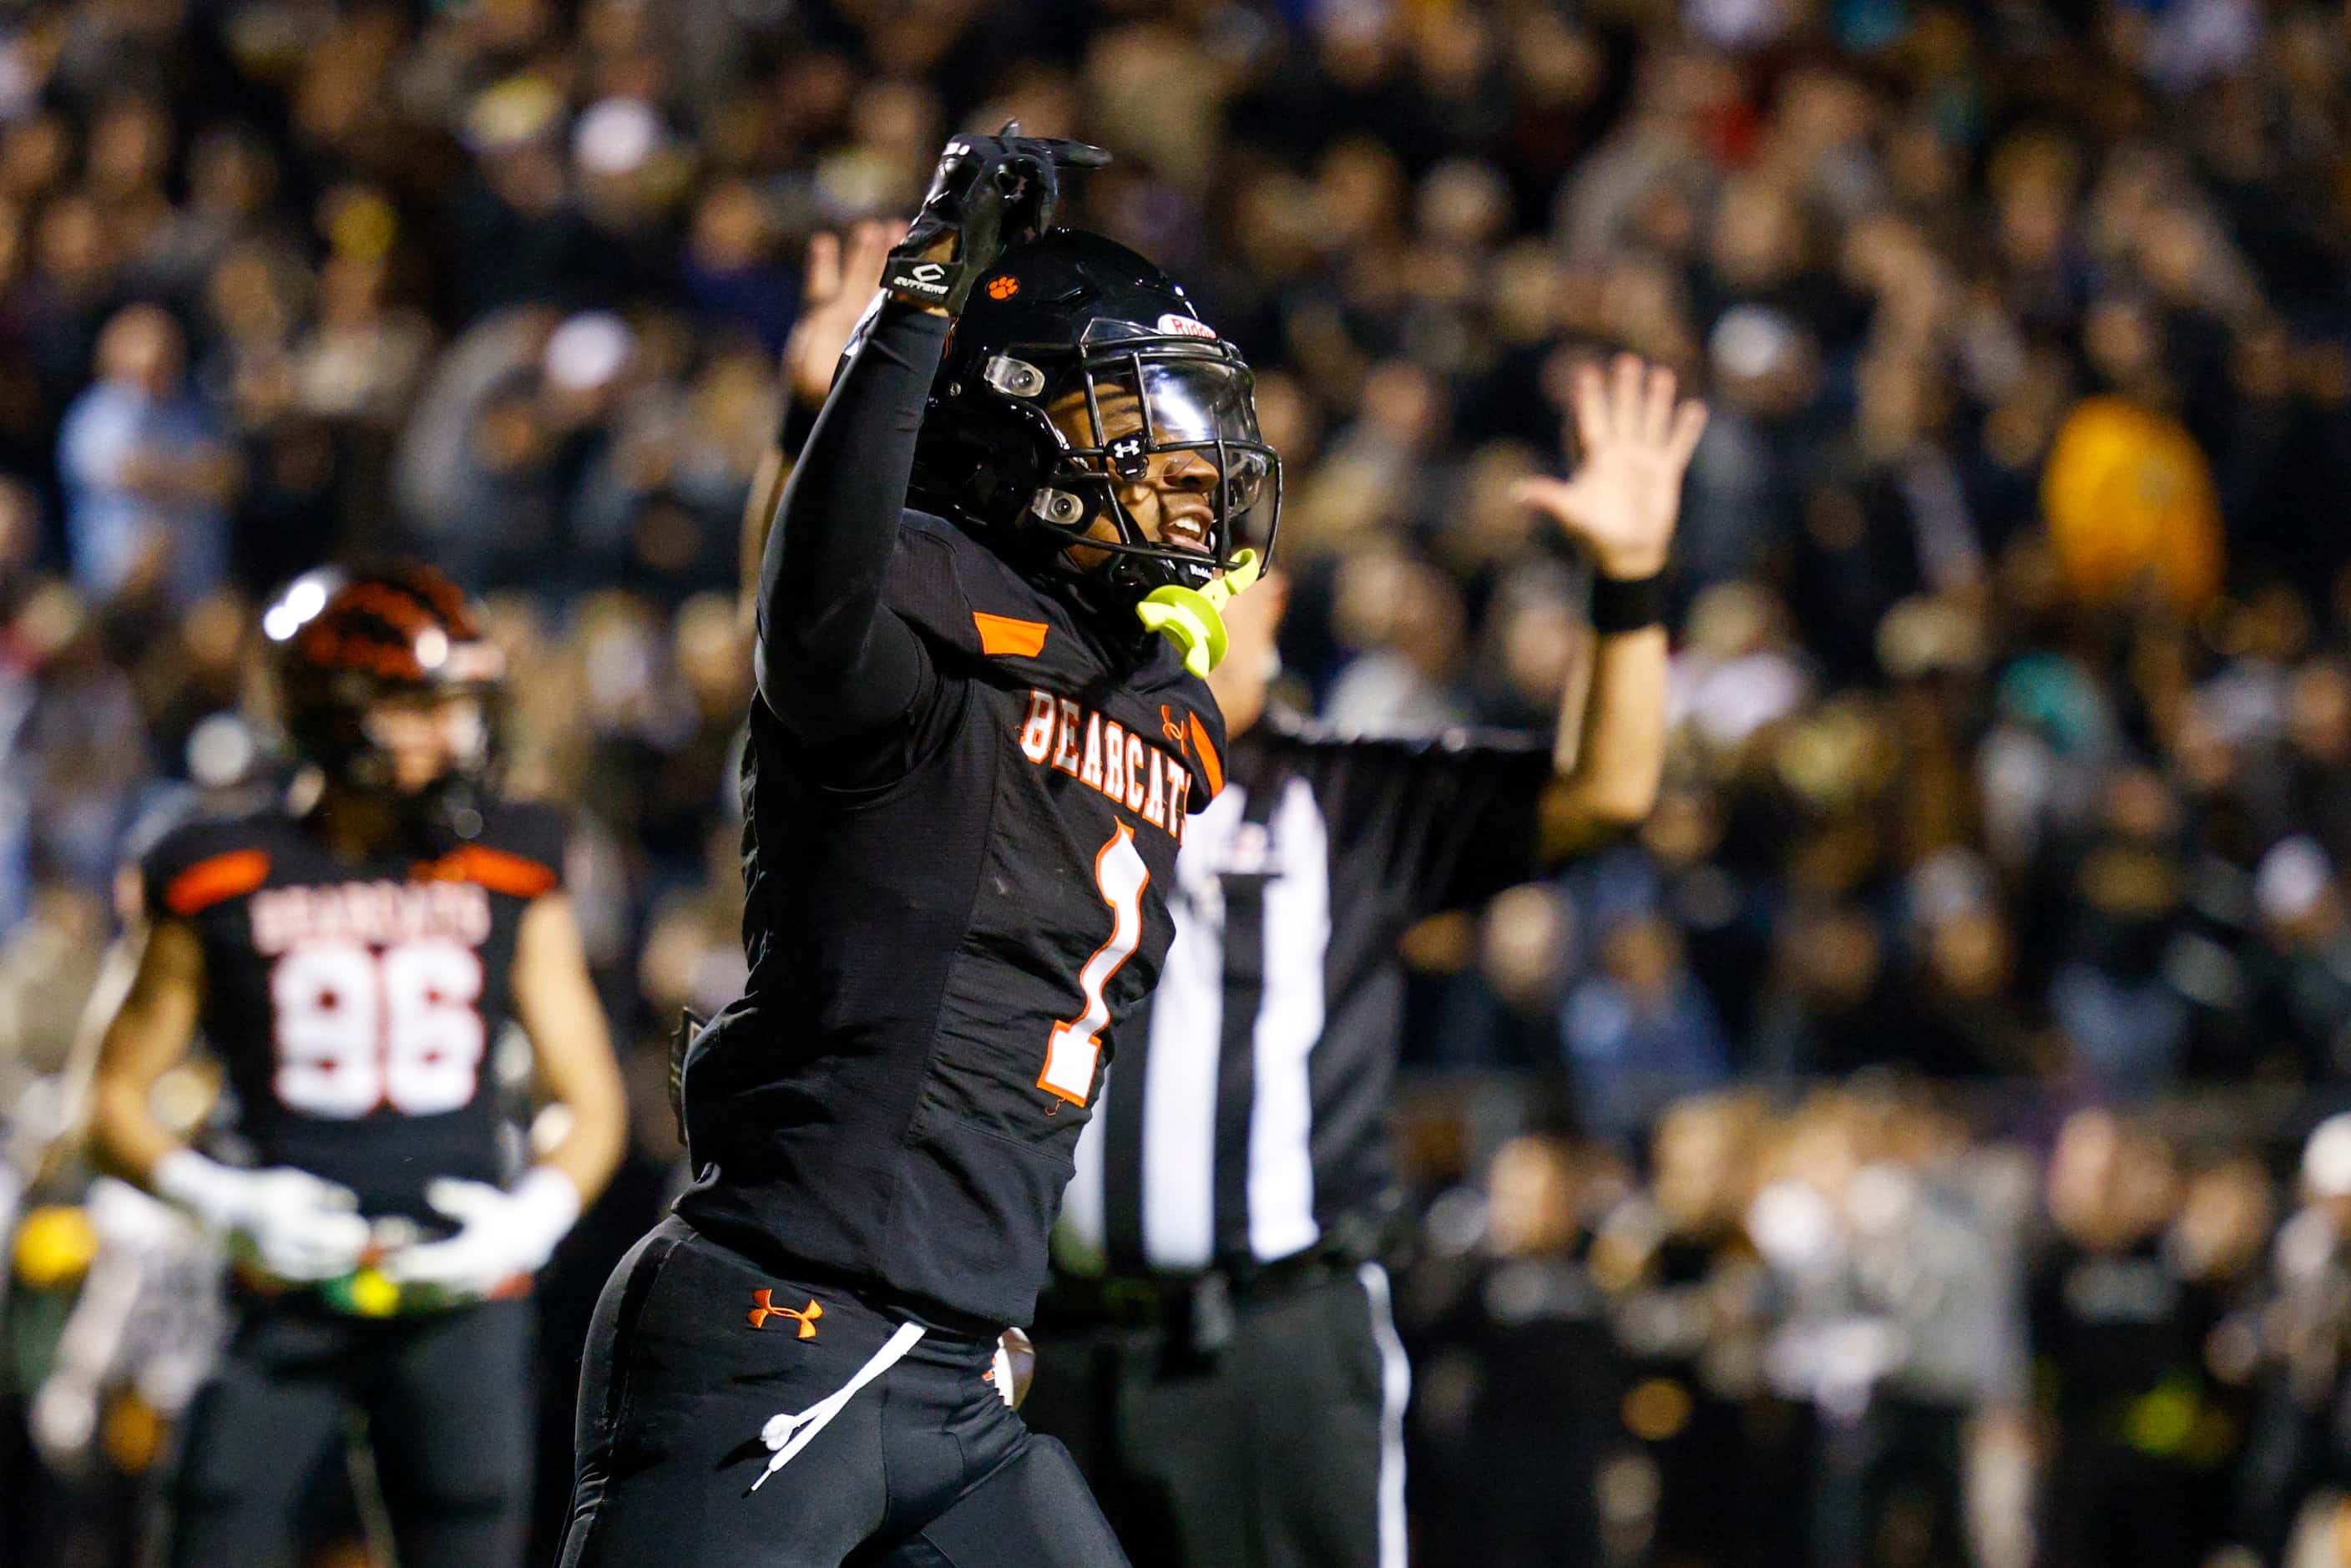 Aledo running back Hawk Patrick-Daniels (1) celebrates after scoring a touchdown during the...